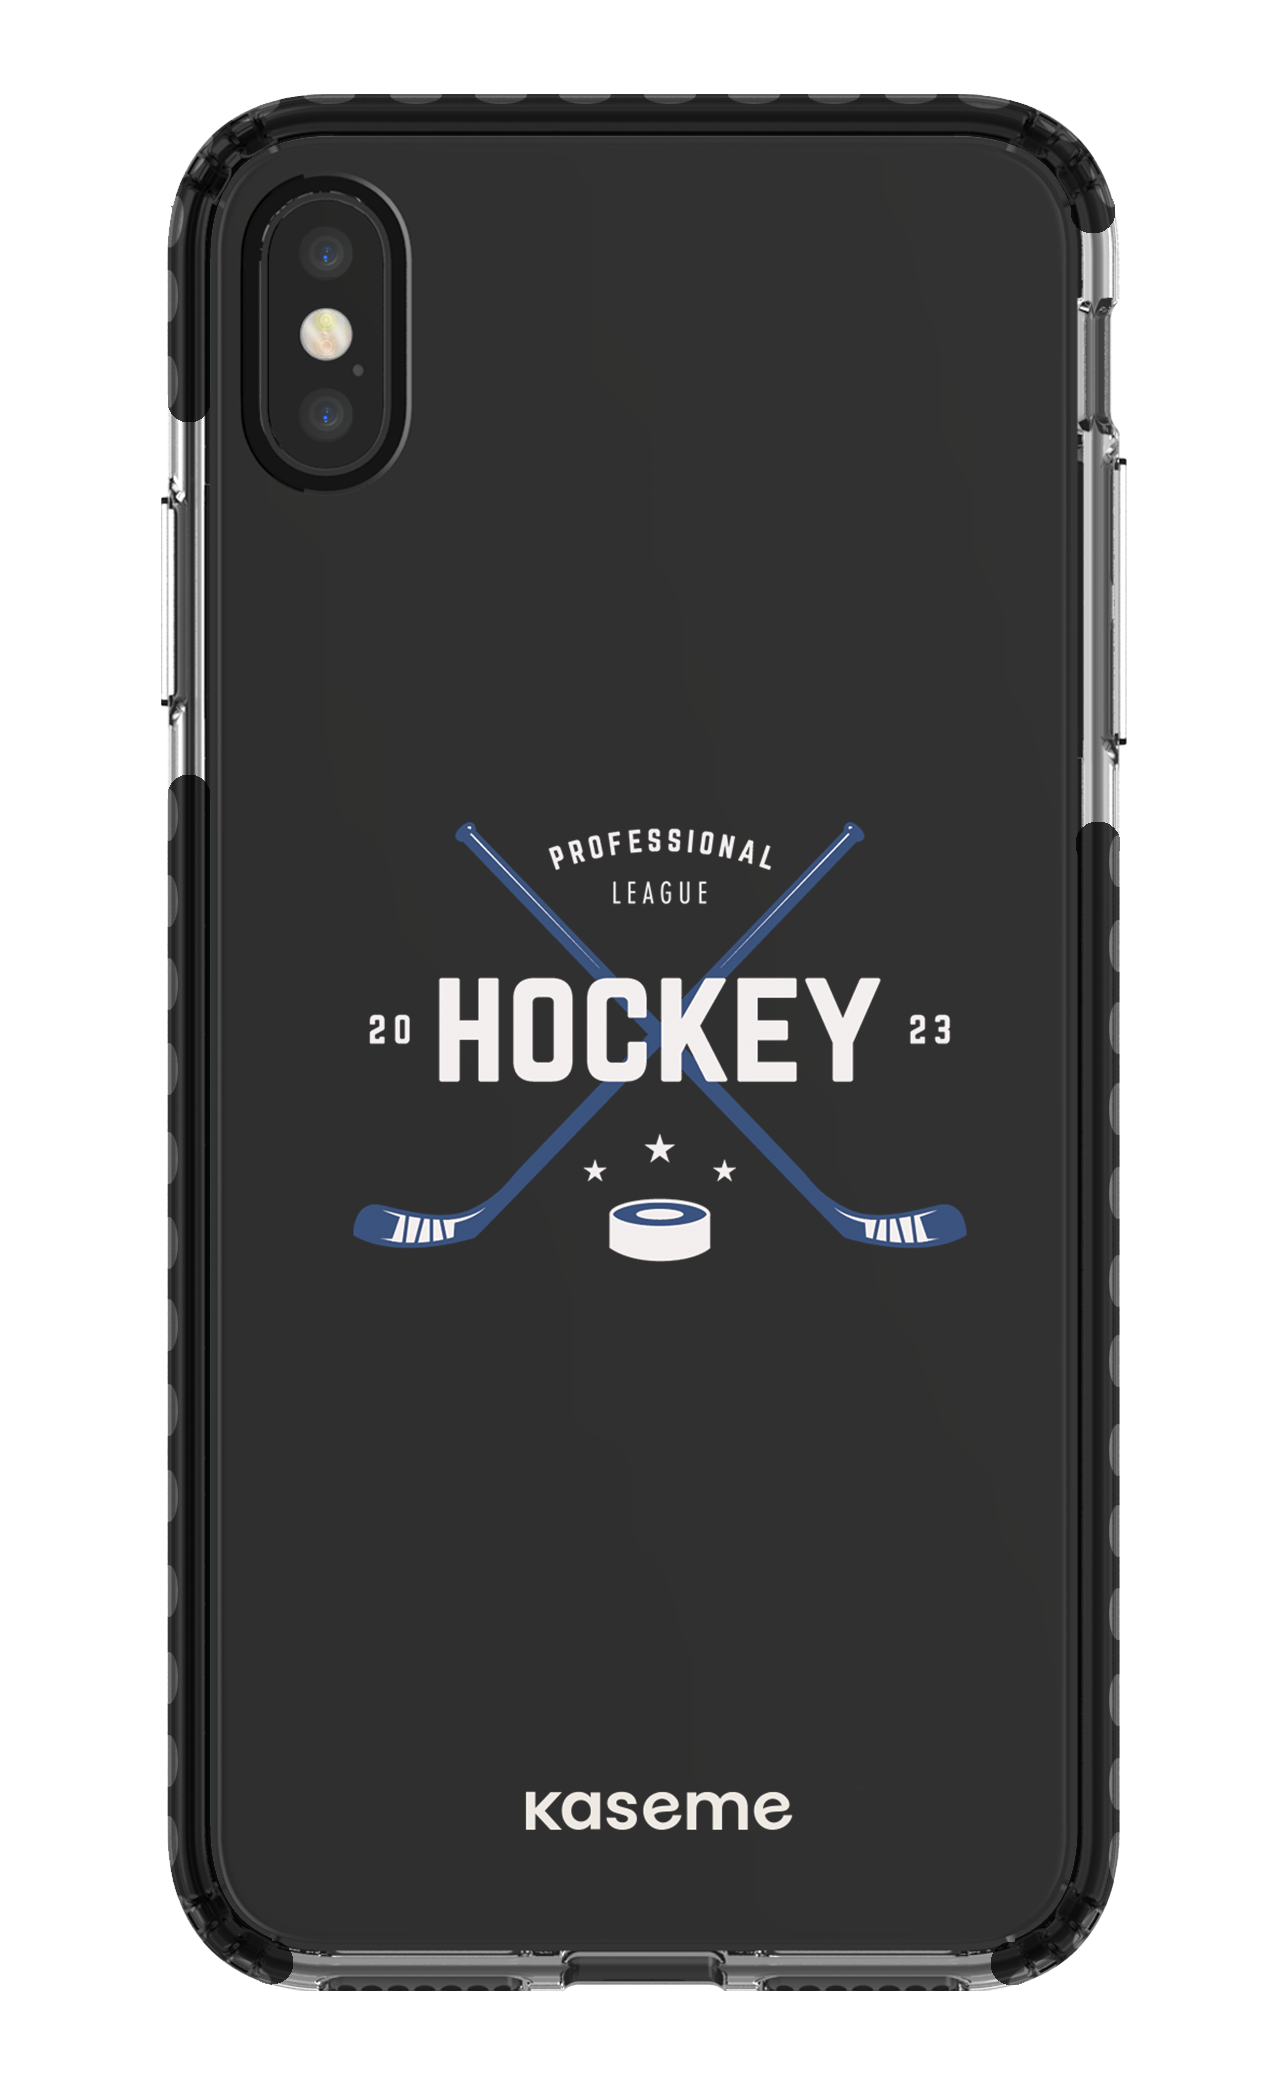 Playoffs clear case - iPhone XS Max